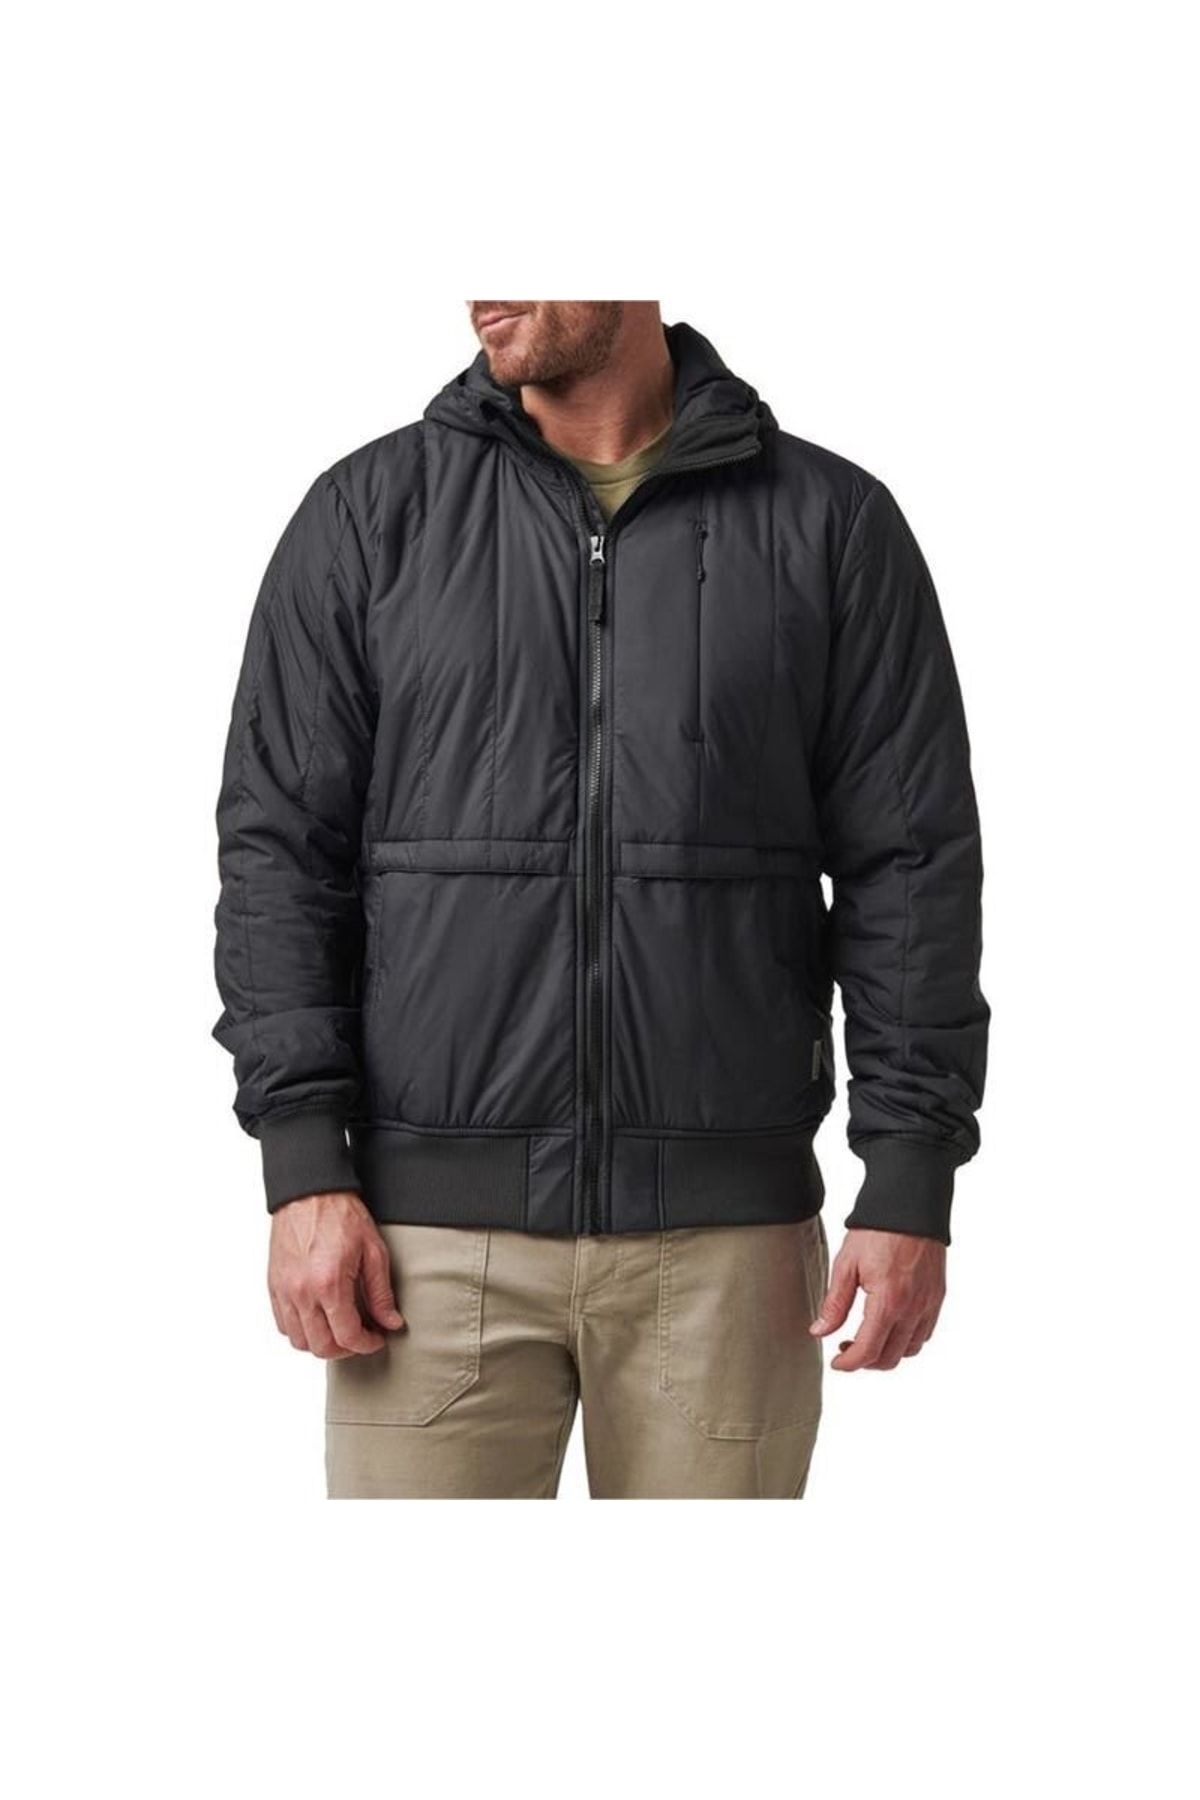 5.11 Tactical 5.11 Thermal Insulator Jacket